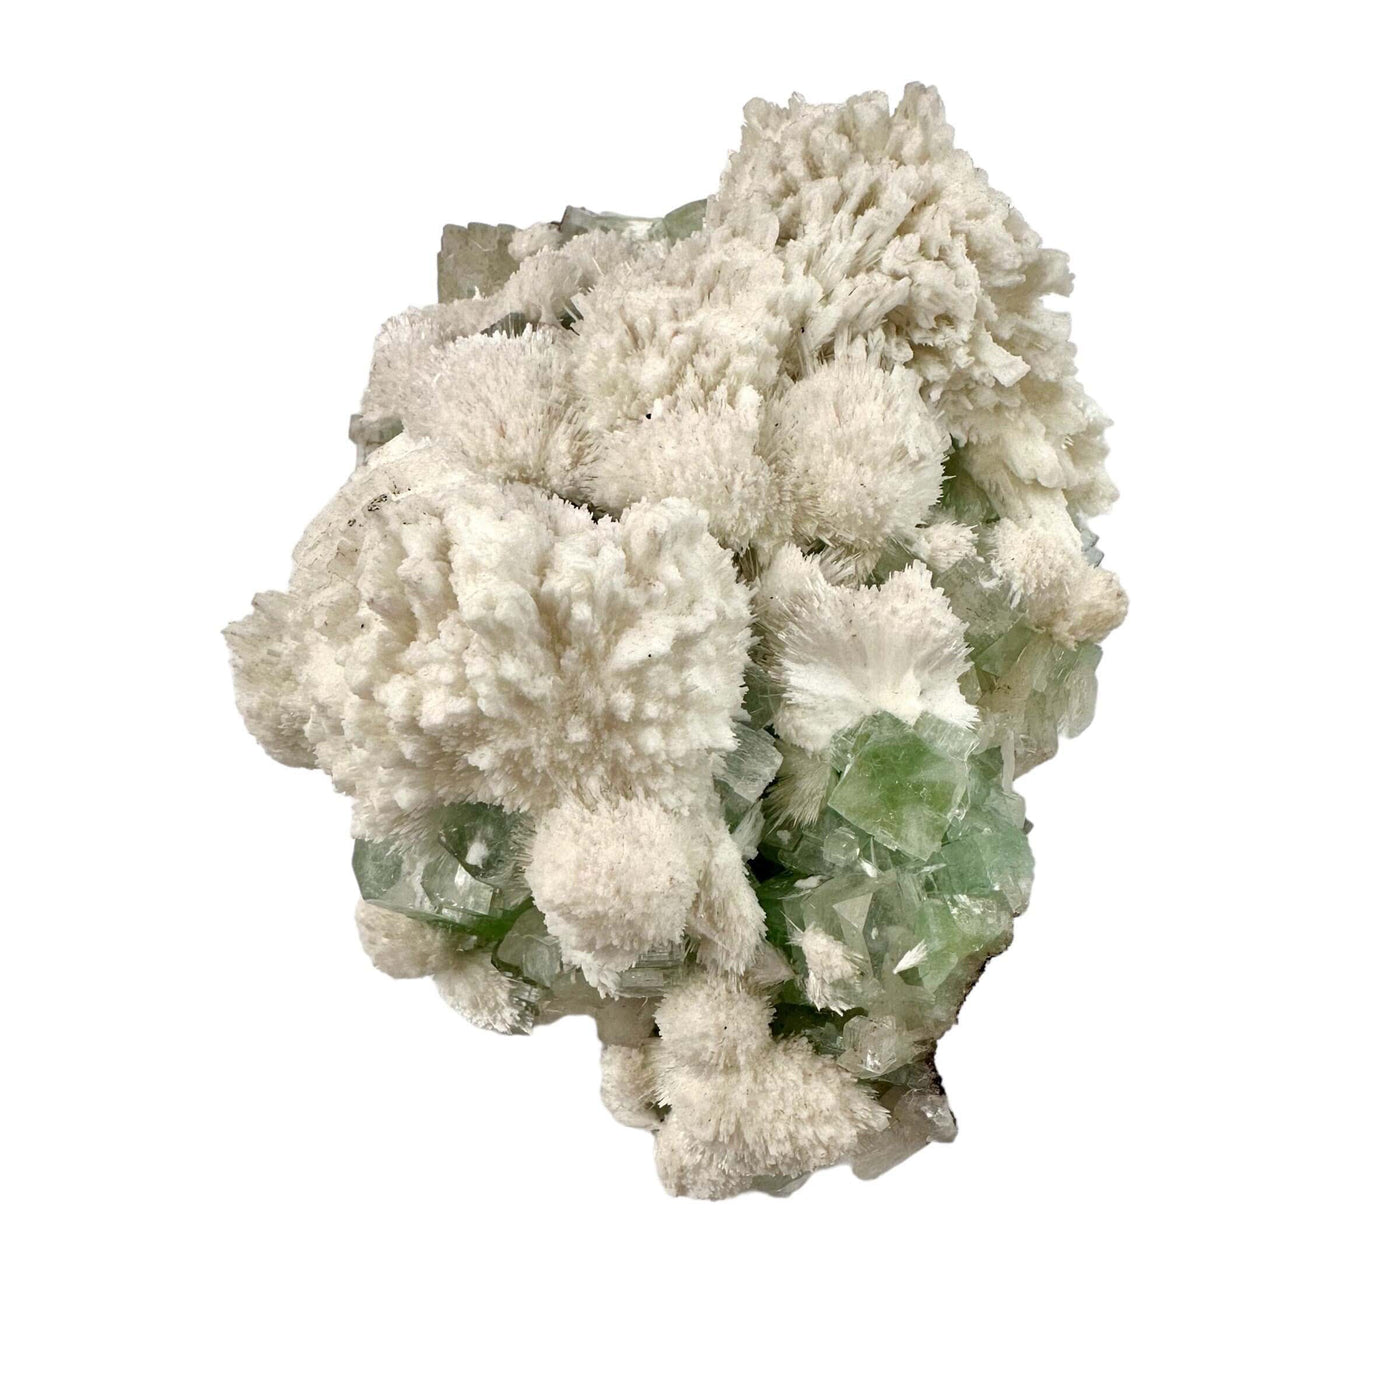 Zeolite with Green Apophyllite - Crystal Cluster - High Quality side view